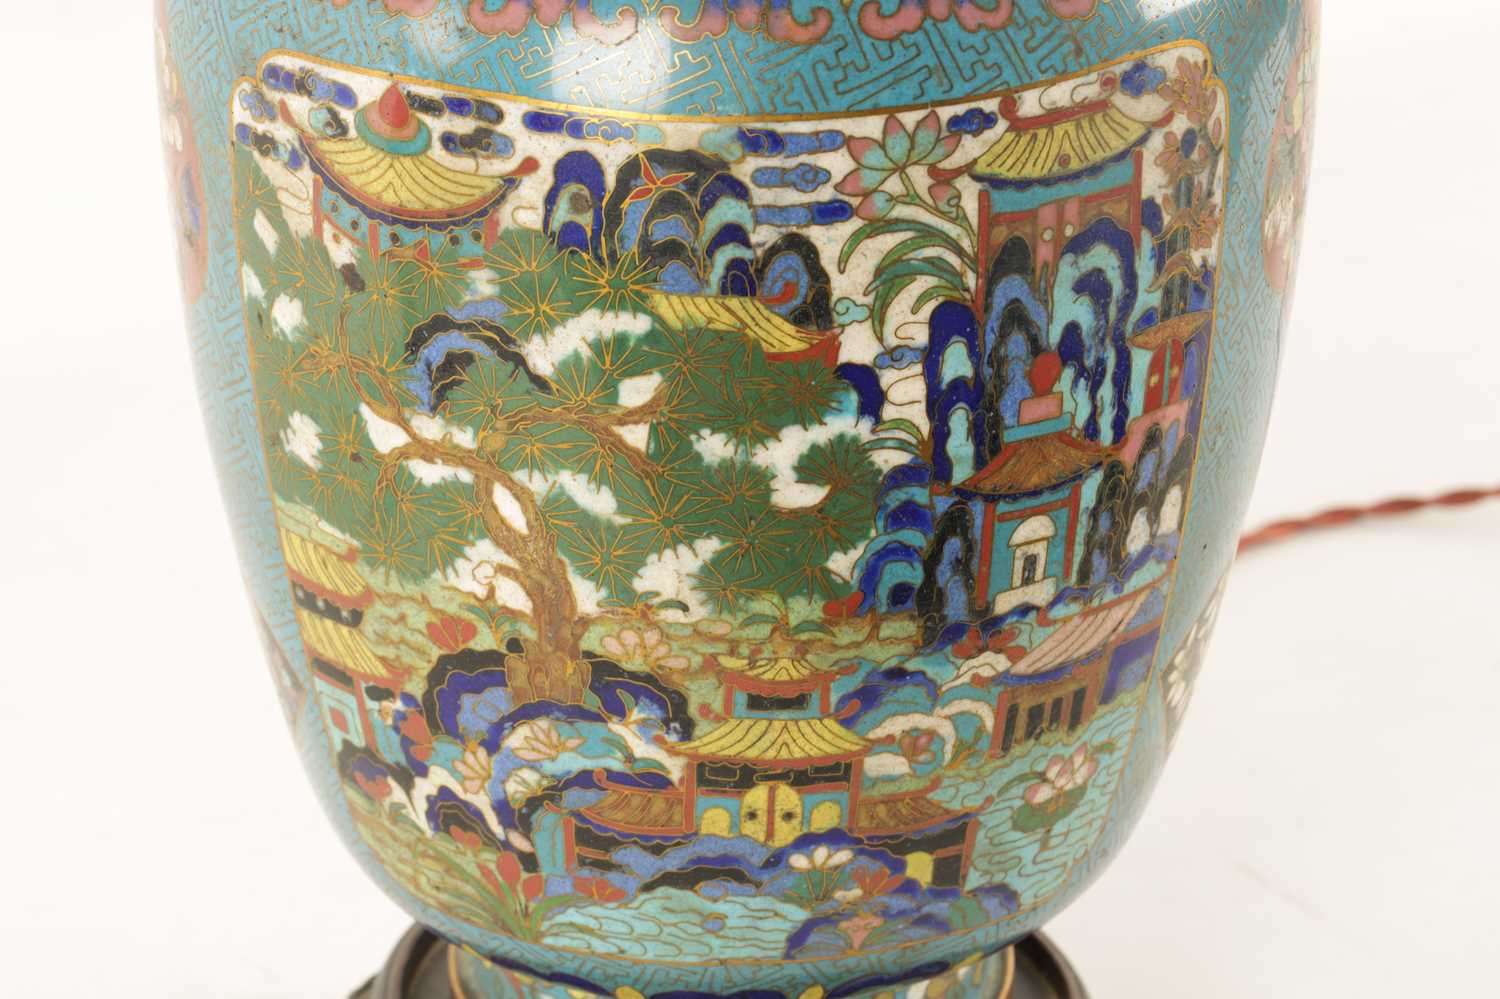 A LATE 19TH/EARLY 20TH CENTURY CENTURY CHINESE CLOISONNE VASE LAMP - Image 10 of 34